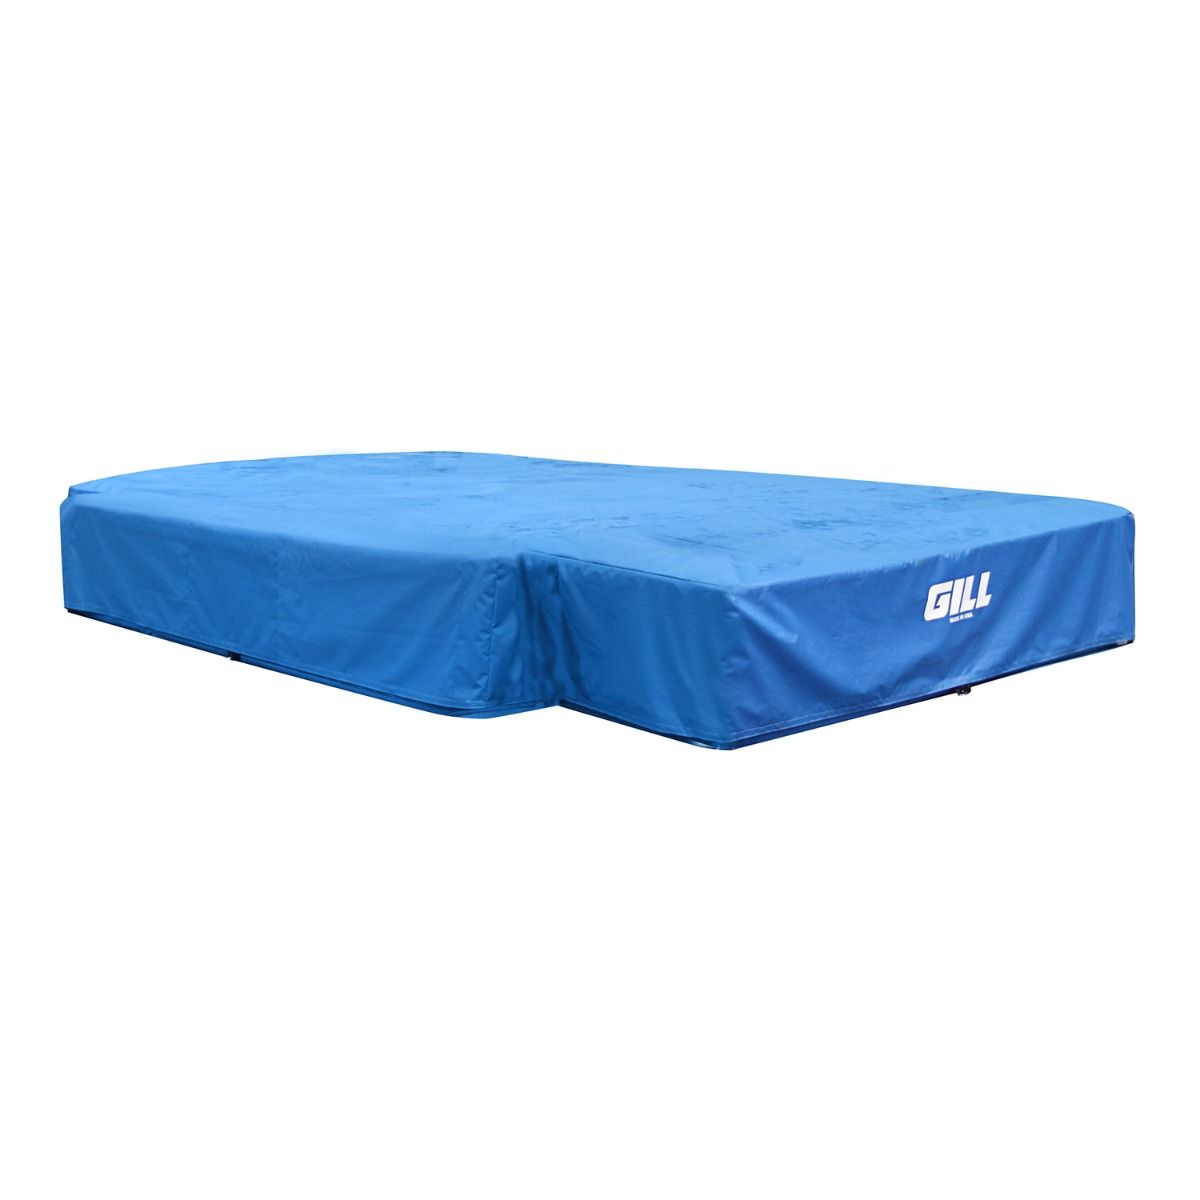 Gill Athletics S4 High Jump Weather Cover